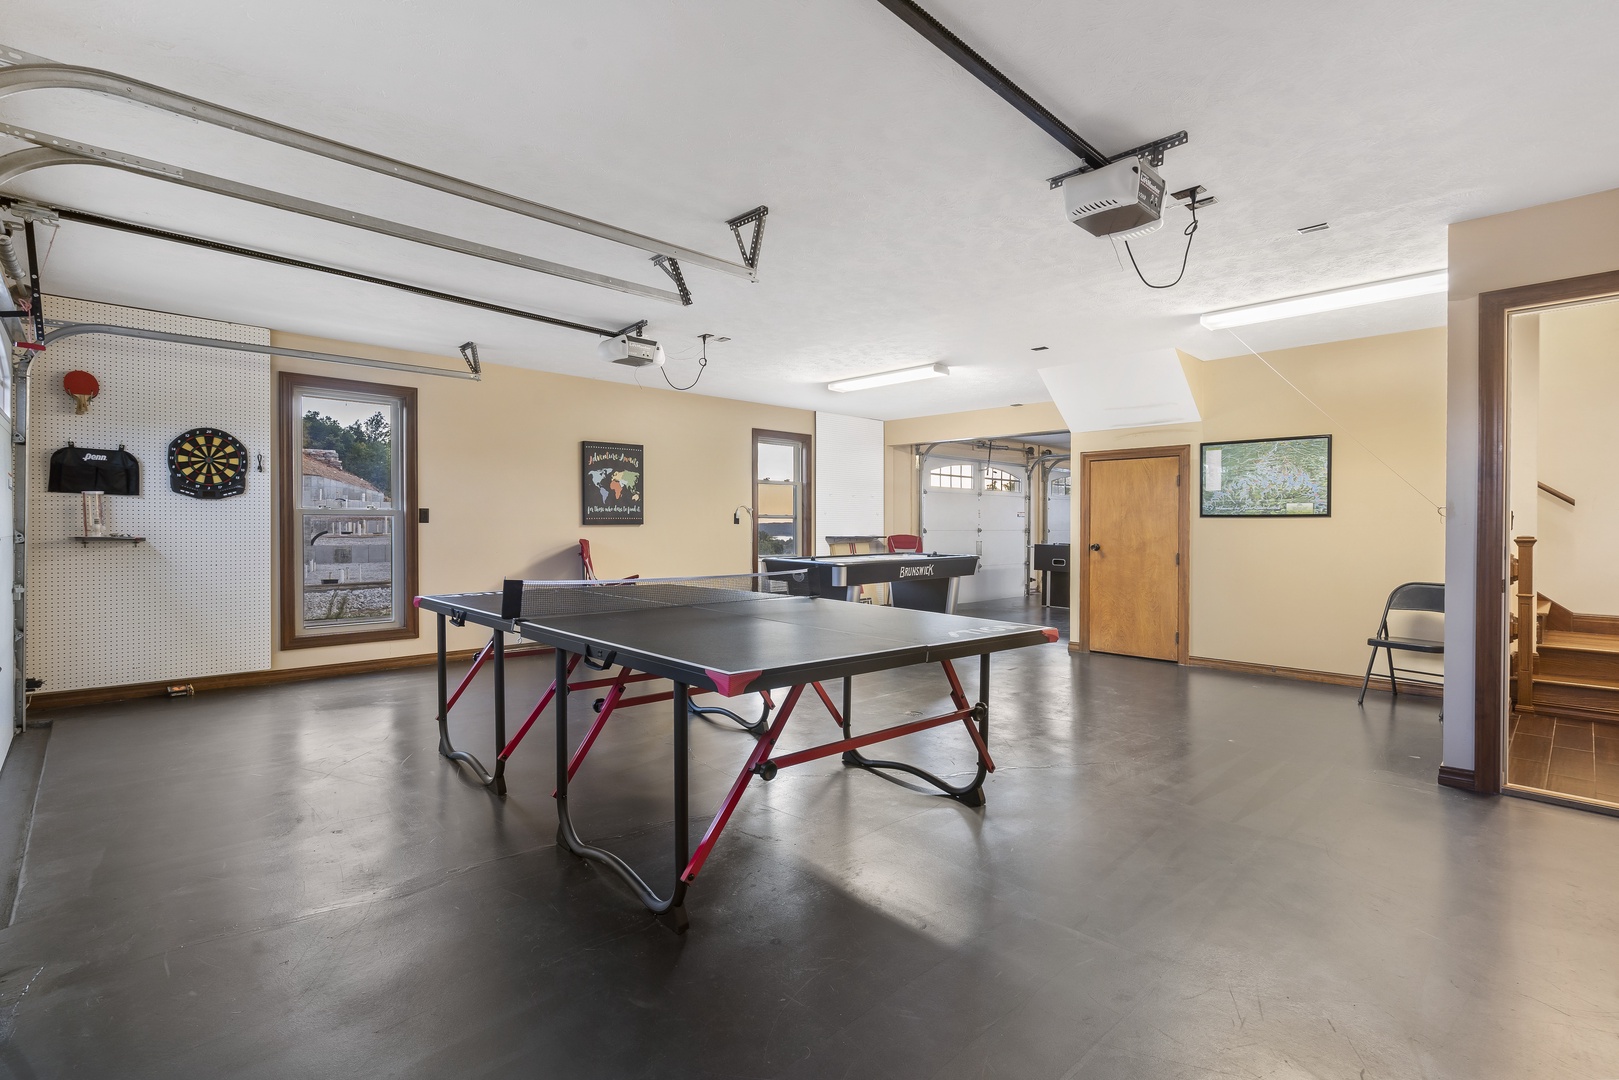 Billiards, ping pong, and air hockey all accessible for some good fun!